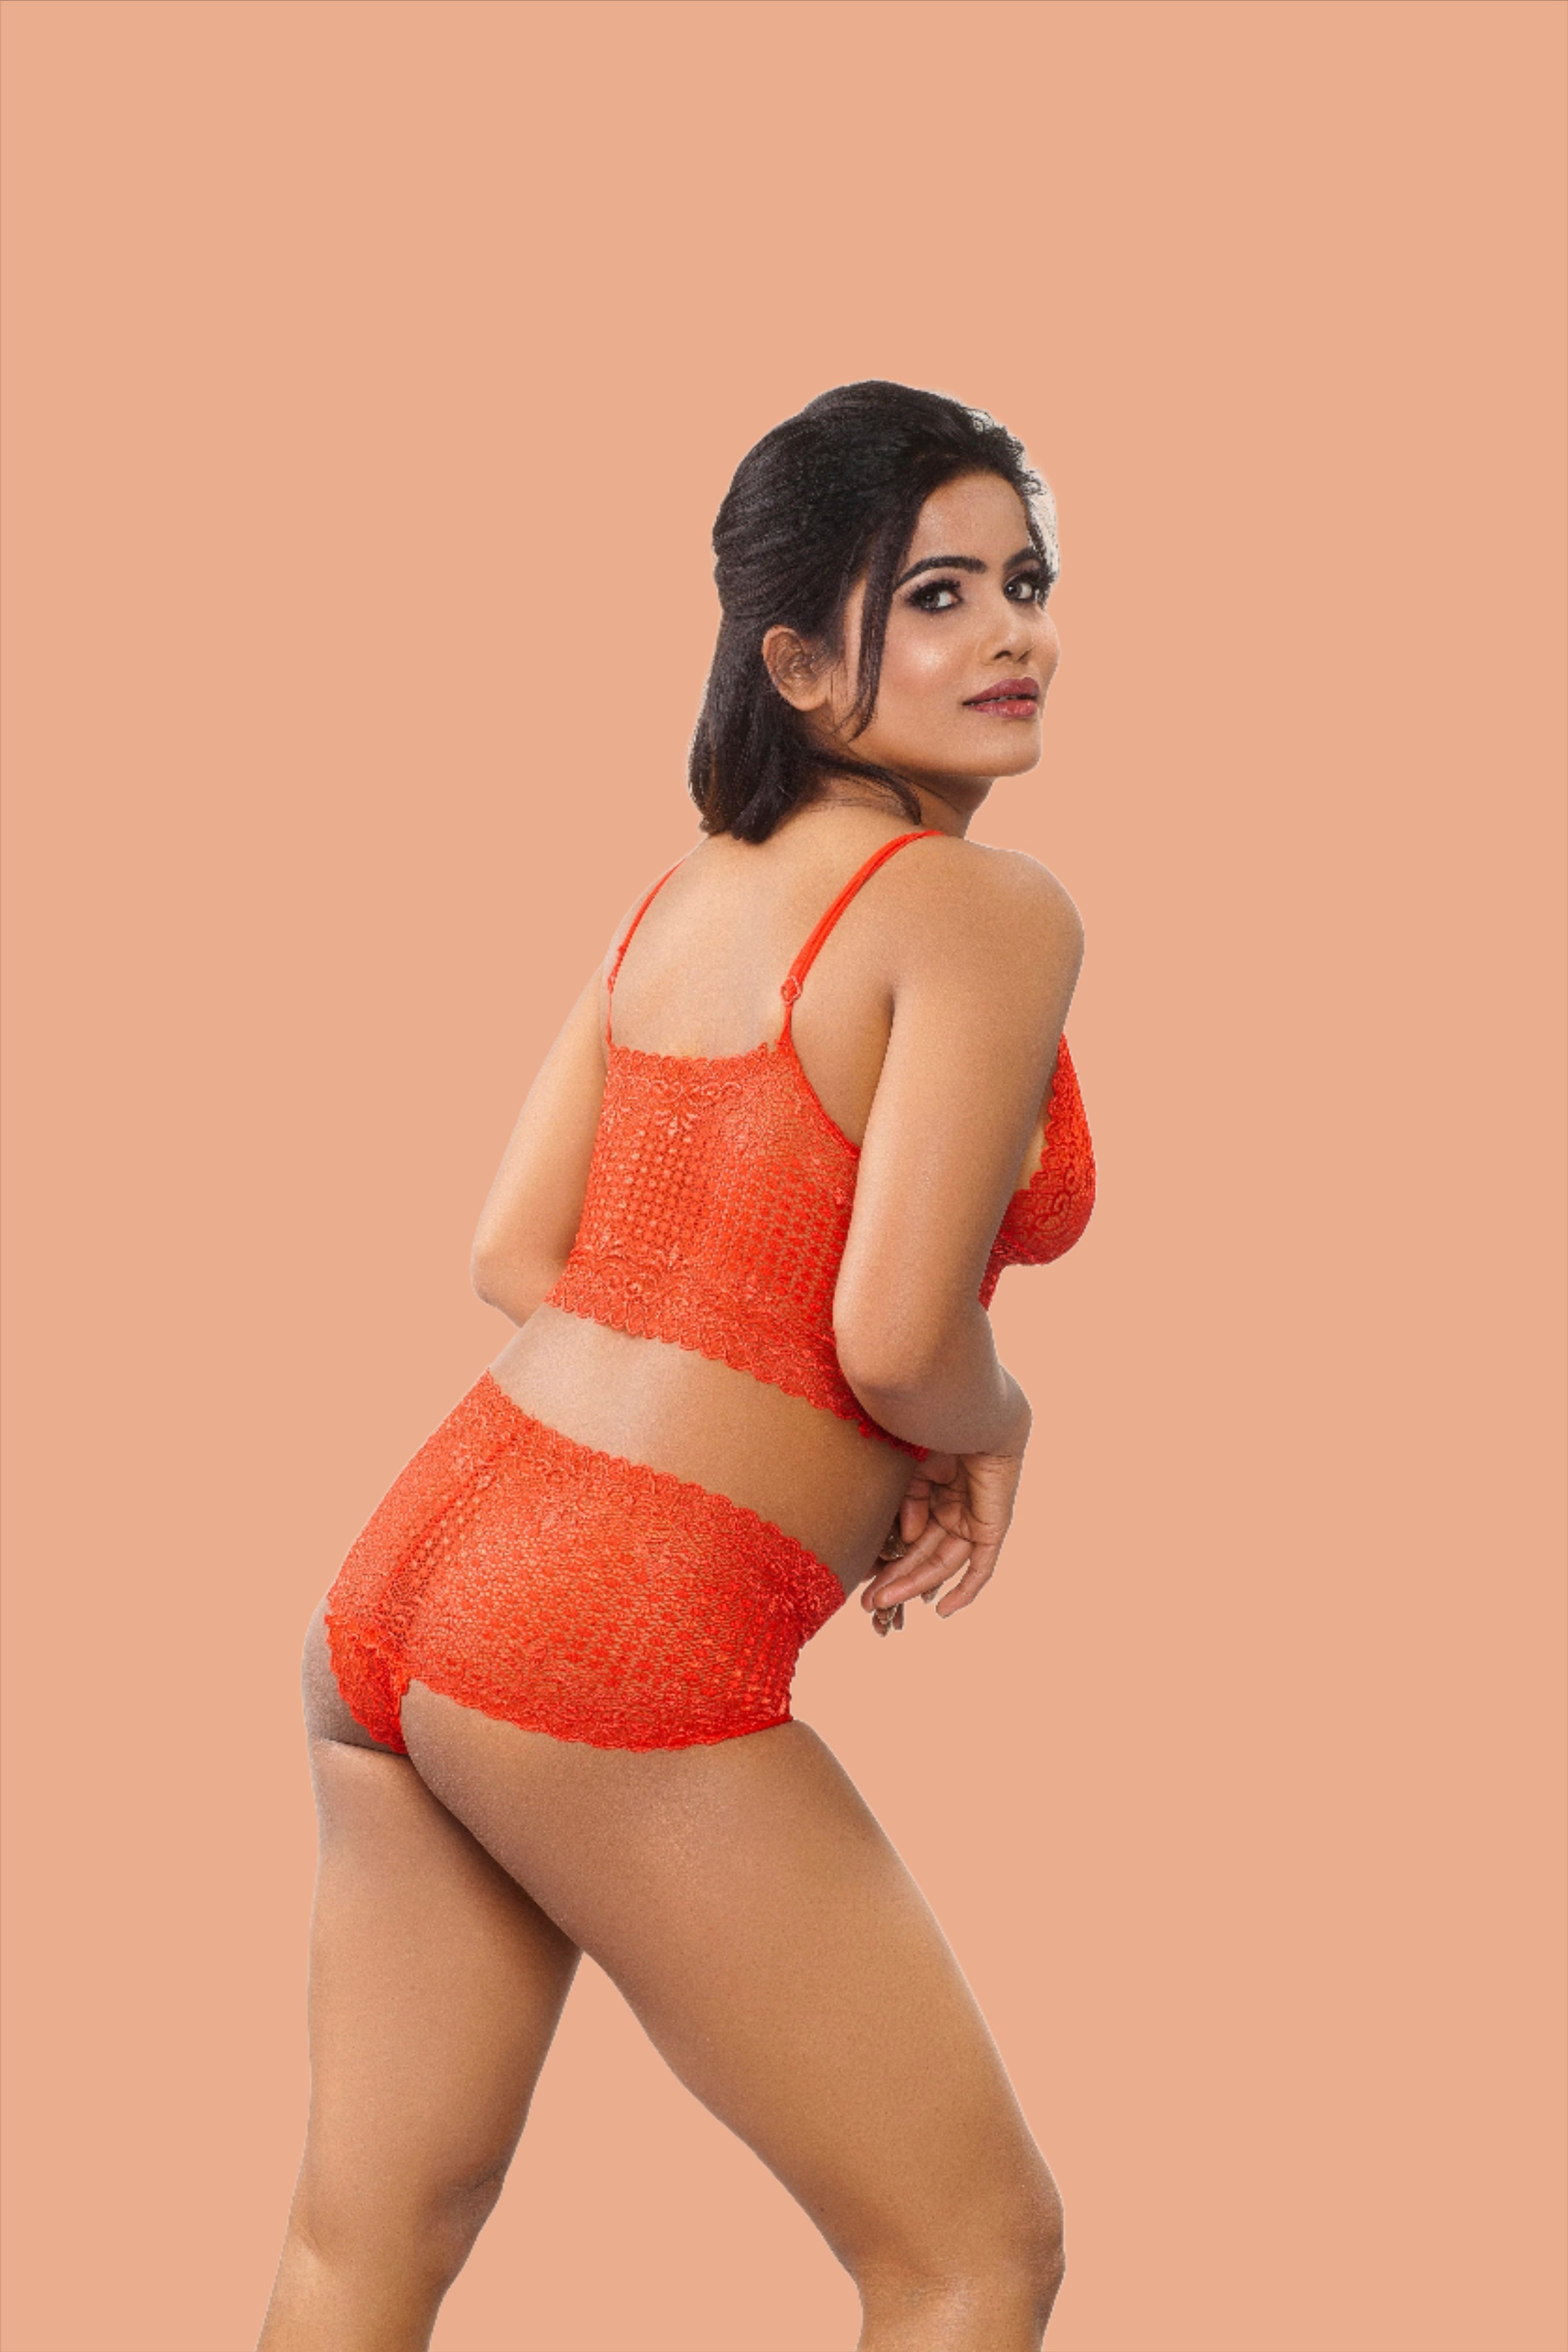 Red Fancy Bra Panty Set, for Inner Wear, Feature : Skin Friendly,  Comfortable at Rs 150 / Set in Greater Noida